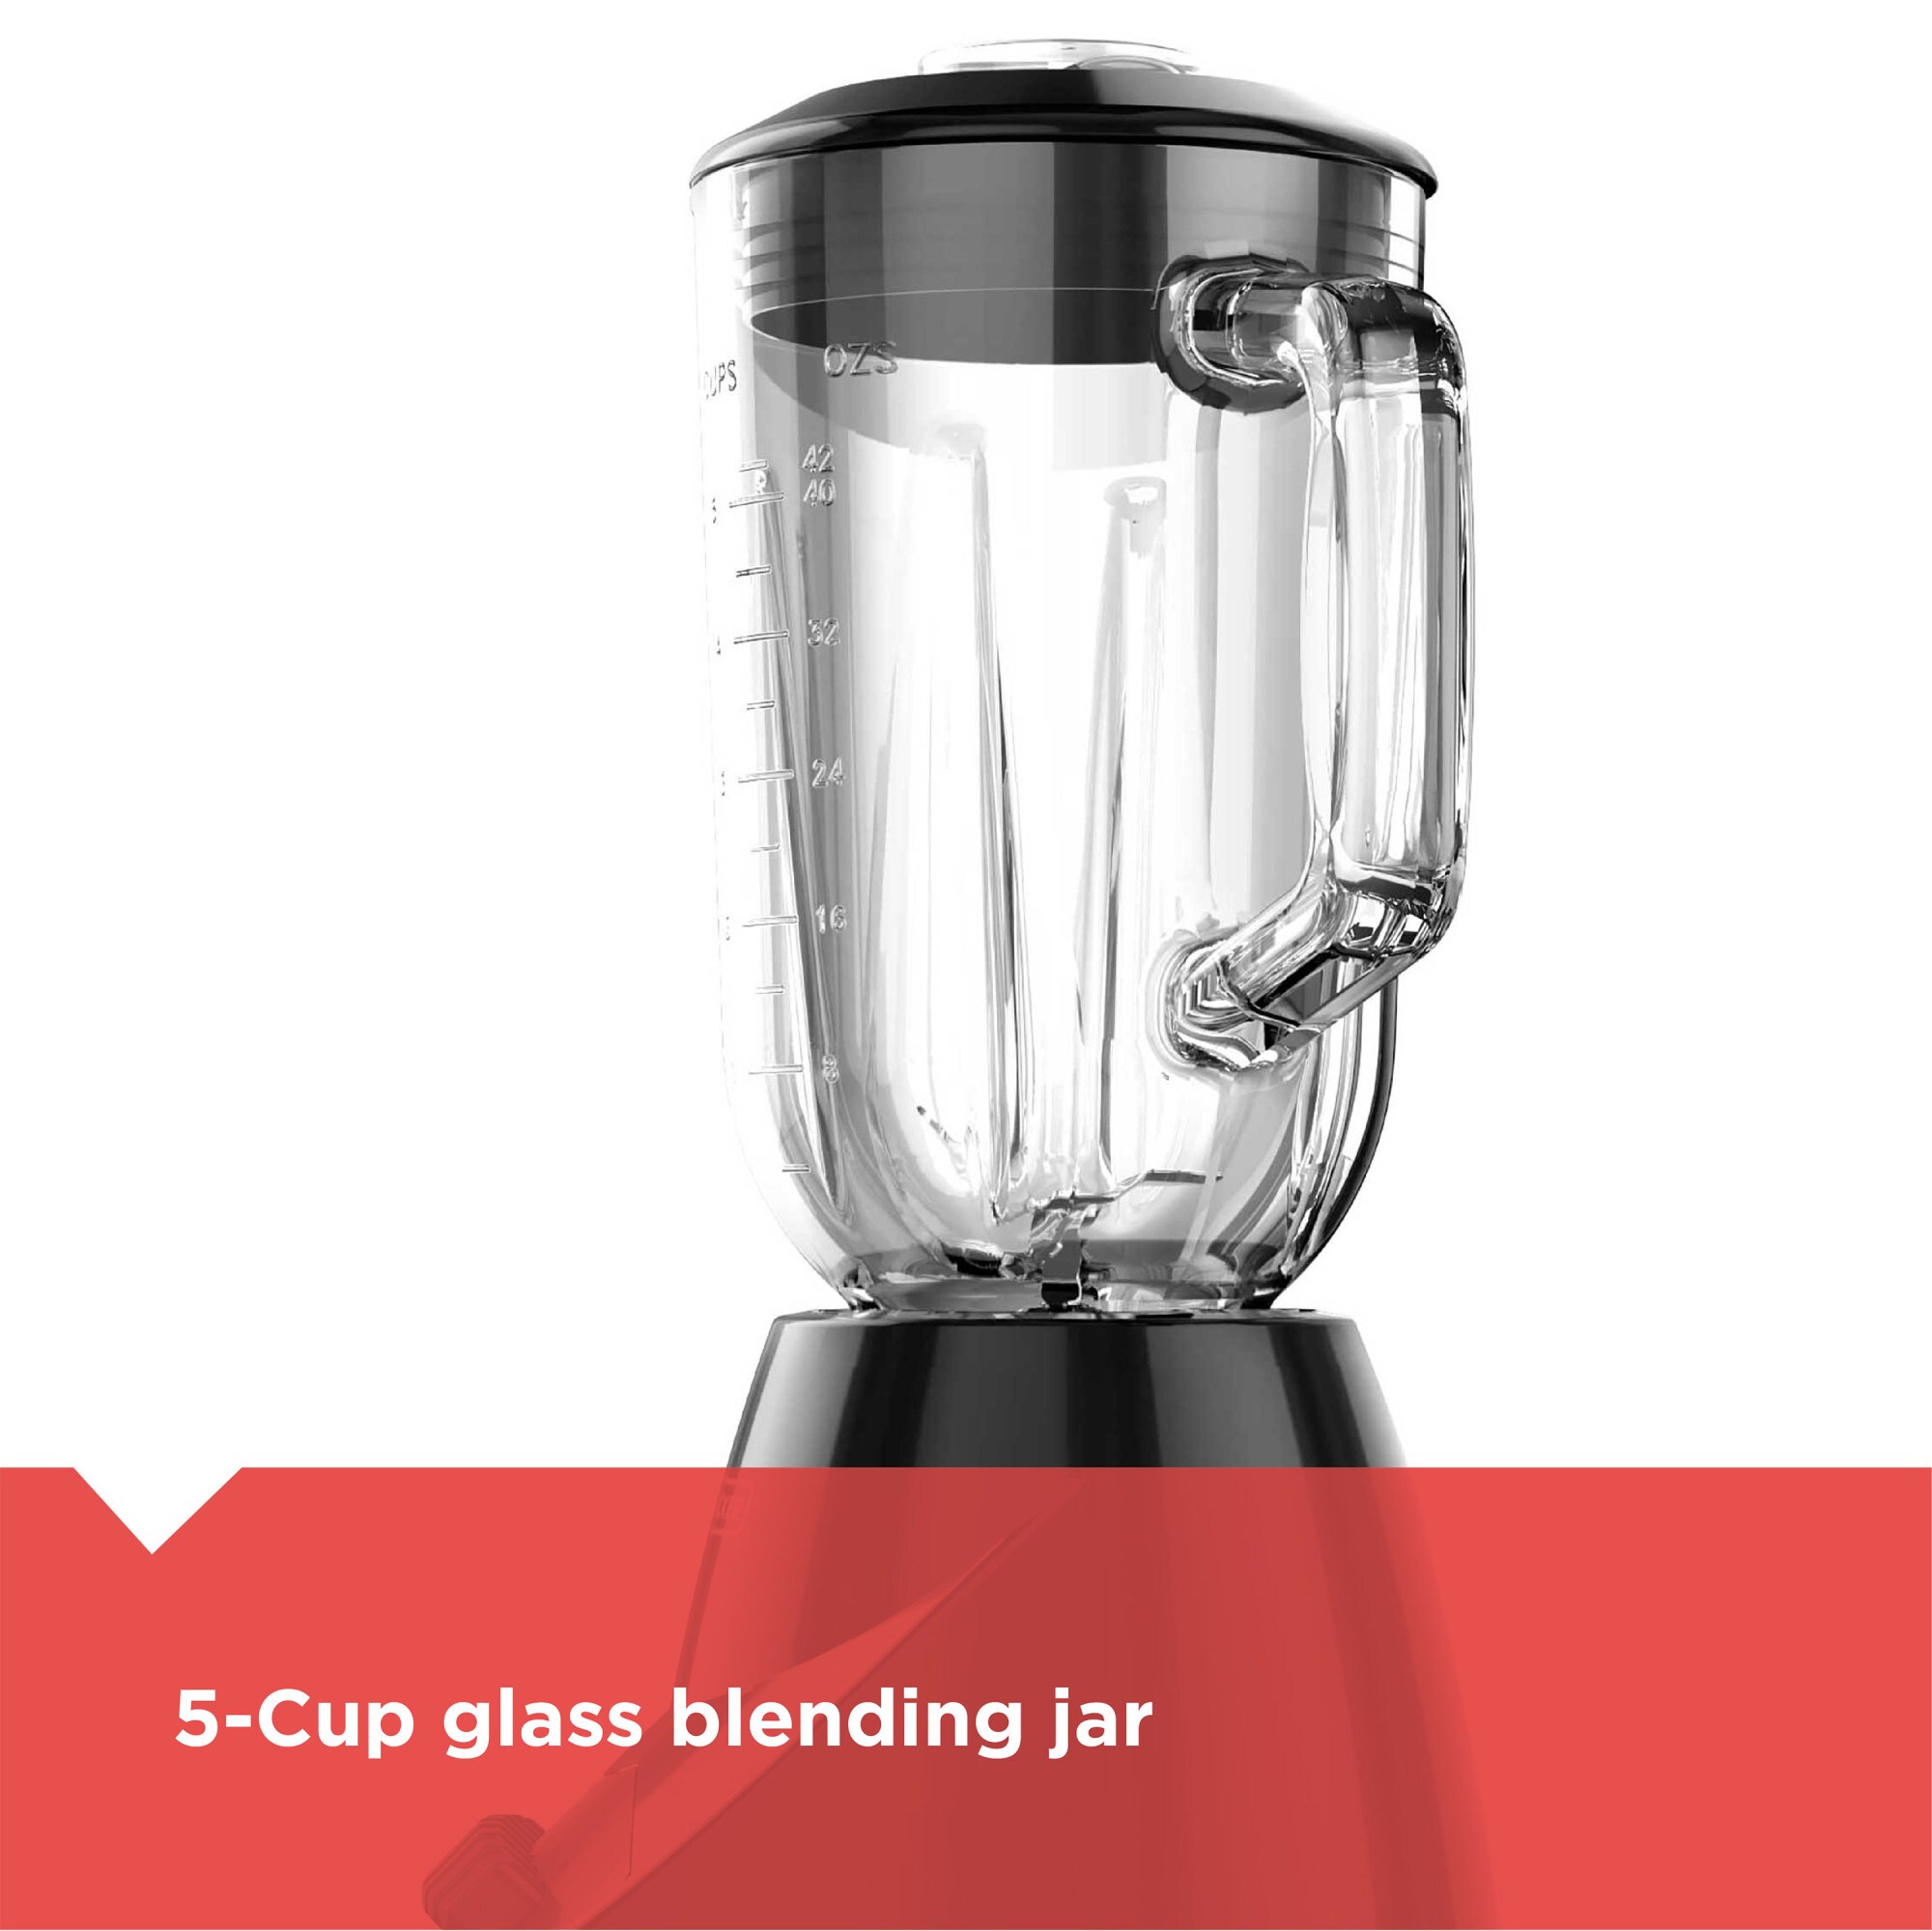 BLACK+DECKER FusionBlade Blender with 6-Cup Glass Jar, Silver